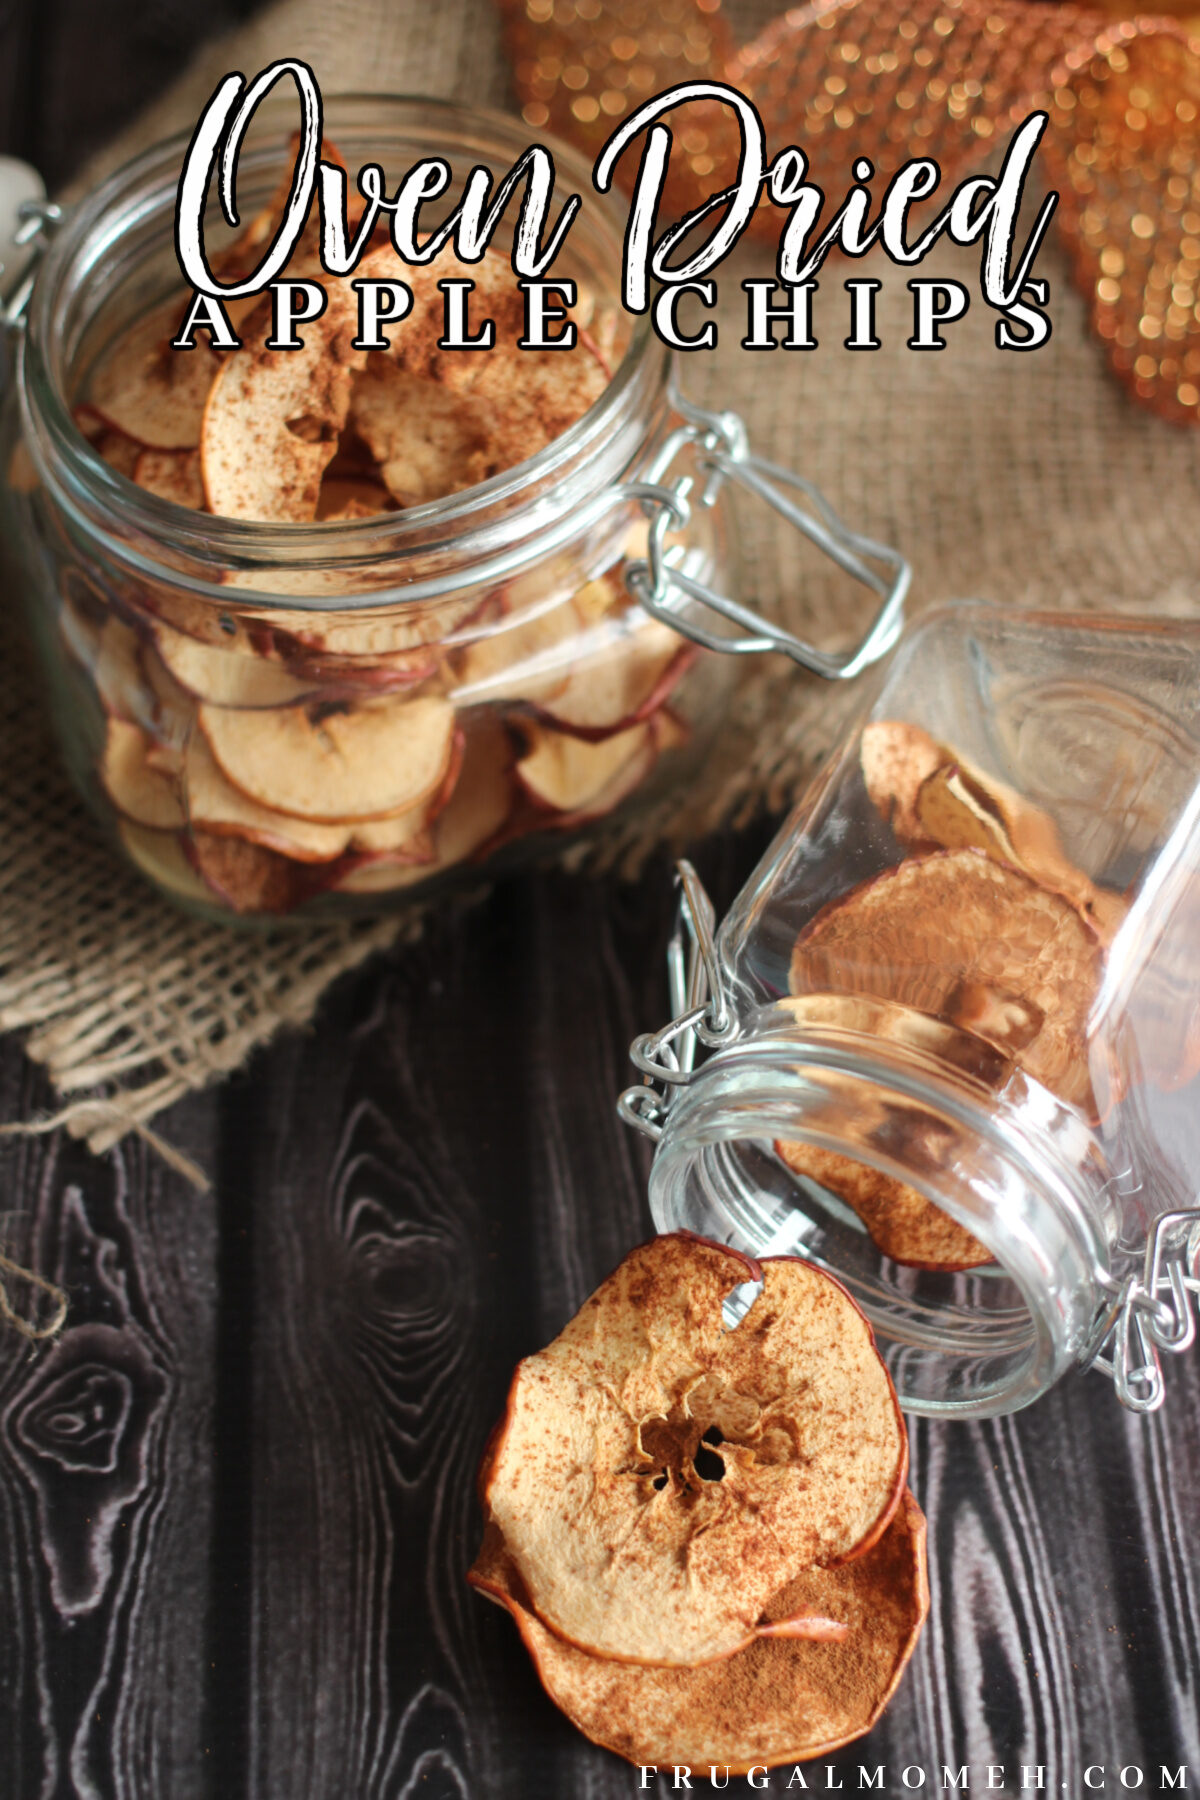 Homemade oven dried apples recipe. A delicious, healthy and easy to make snack that are dried slowly in the oven with a sprinkle of cinnamon.